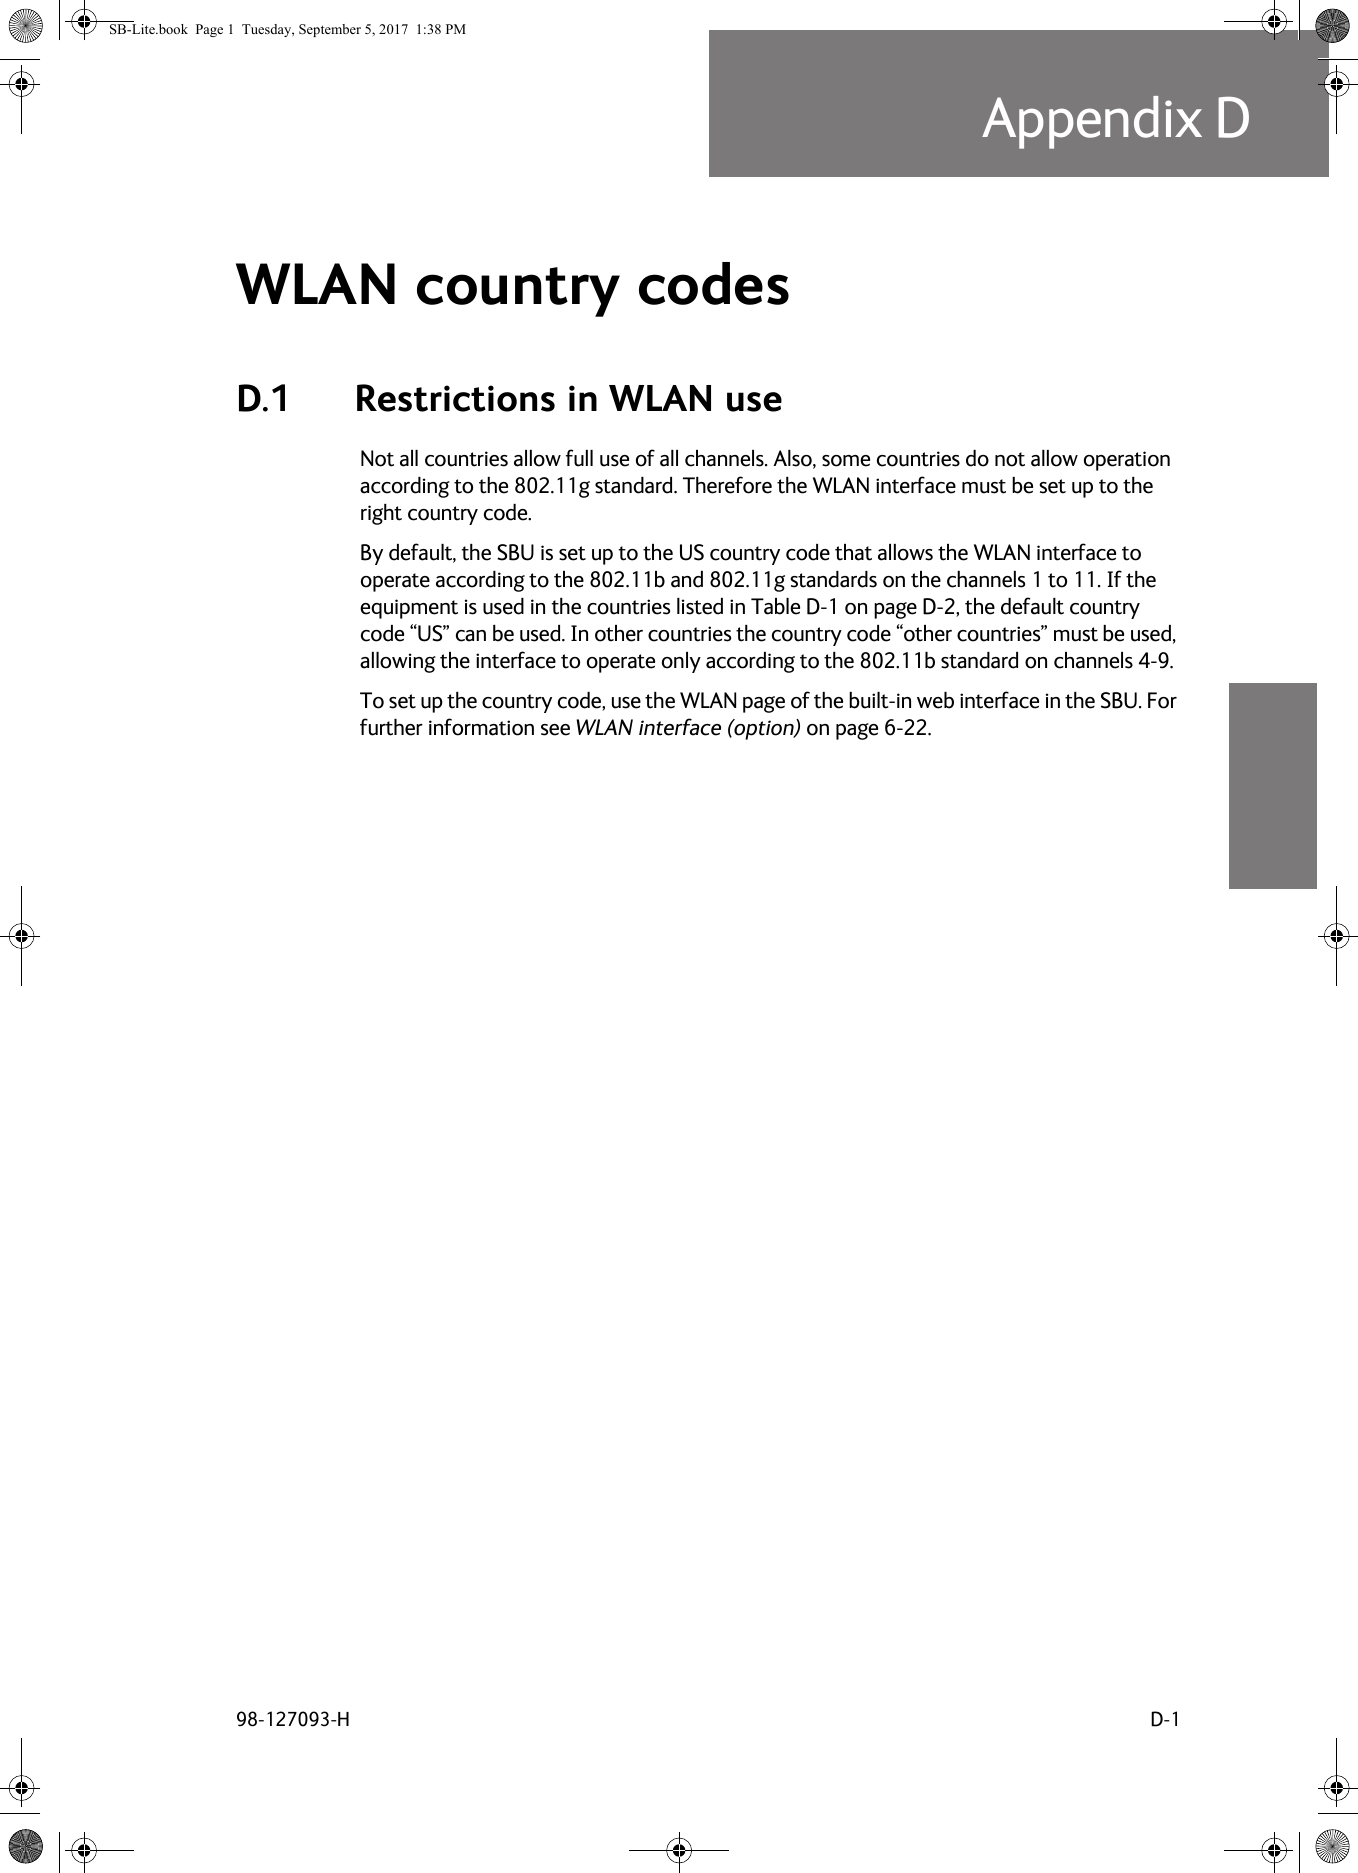 98-127093-H D-1Appendix DDDDDWLAN country codes DD.1 Restrictions in WLAN useNot all countries allow full use of all channels. Also, some countries do not allow operation according to the 802.11g standard. Therefore the WLAN interface must be set up to the right country code.By default, the SBU is set up to the US country code that allows the WLAN interface to operate according to the 802.11b and 802.11g standards on the channels 1 to 11. If the equipment is used in the countries listed in Table  D-1 on page  D-2, the default country code “US” can be used. In other countries the country code “other countries” must be used, allowing the interface to operate only according to the 802.11b standard on channels 4-9.To set up the country code, use the WLAN page of the built-in web interface in the SBU. For further information see WLAN interface (option) on page  6-22.SB-Lite.book  Page 1  Tuesday, September 5, 2017  1:38 PM